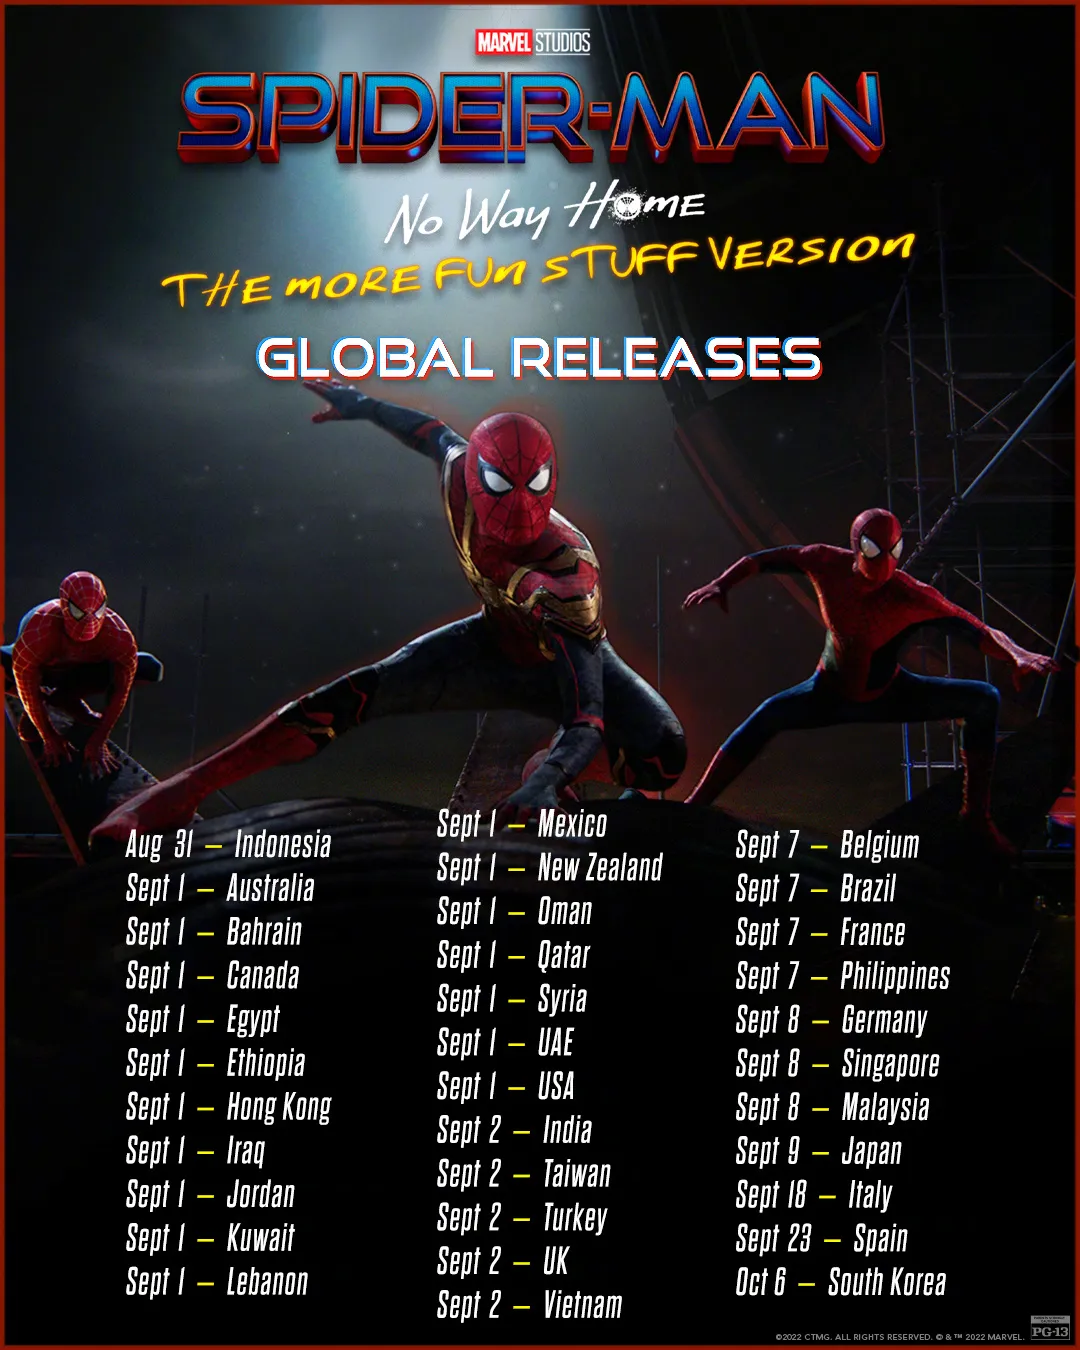 'Spider-Man: No Way Home' 'The more Fun stuff Version' announced to be re-released in multiple locations worldwide on August 31st | FMV6